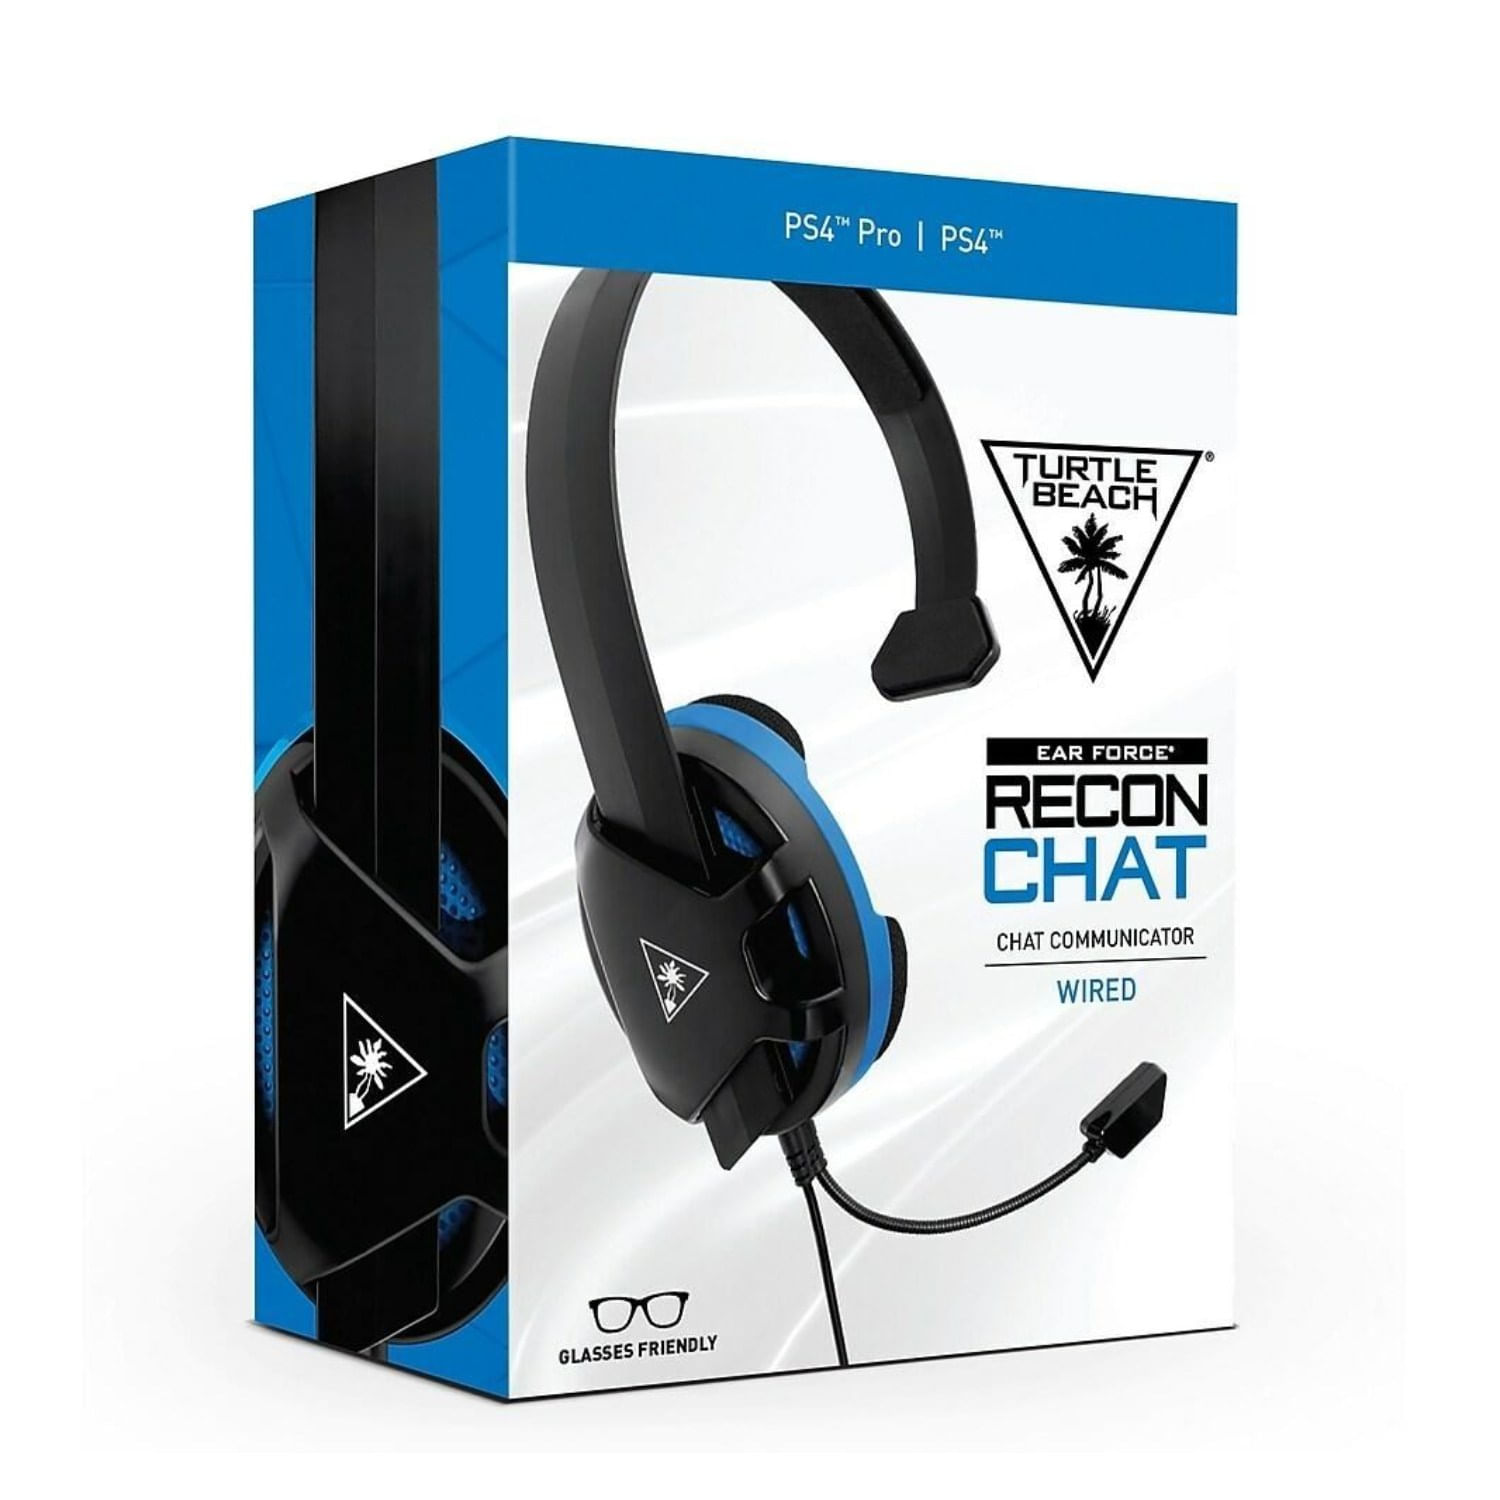 Audifonos Gaming Turtle Beach Recon Chat Ps4 Pro Xbox One Negro